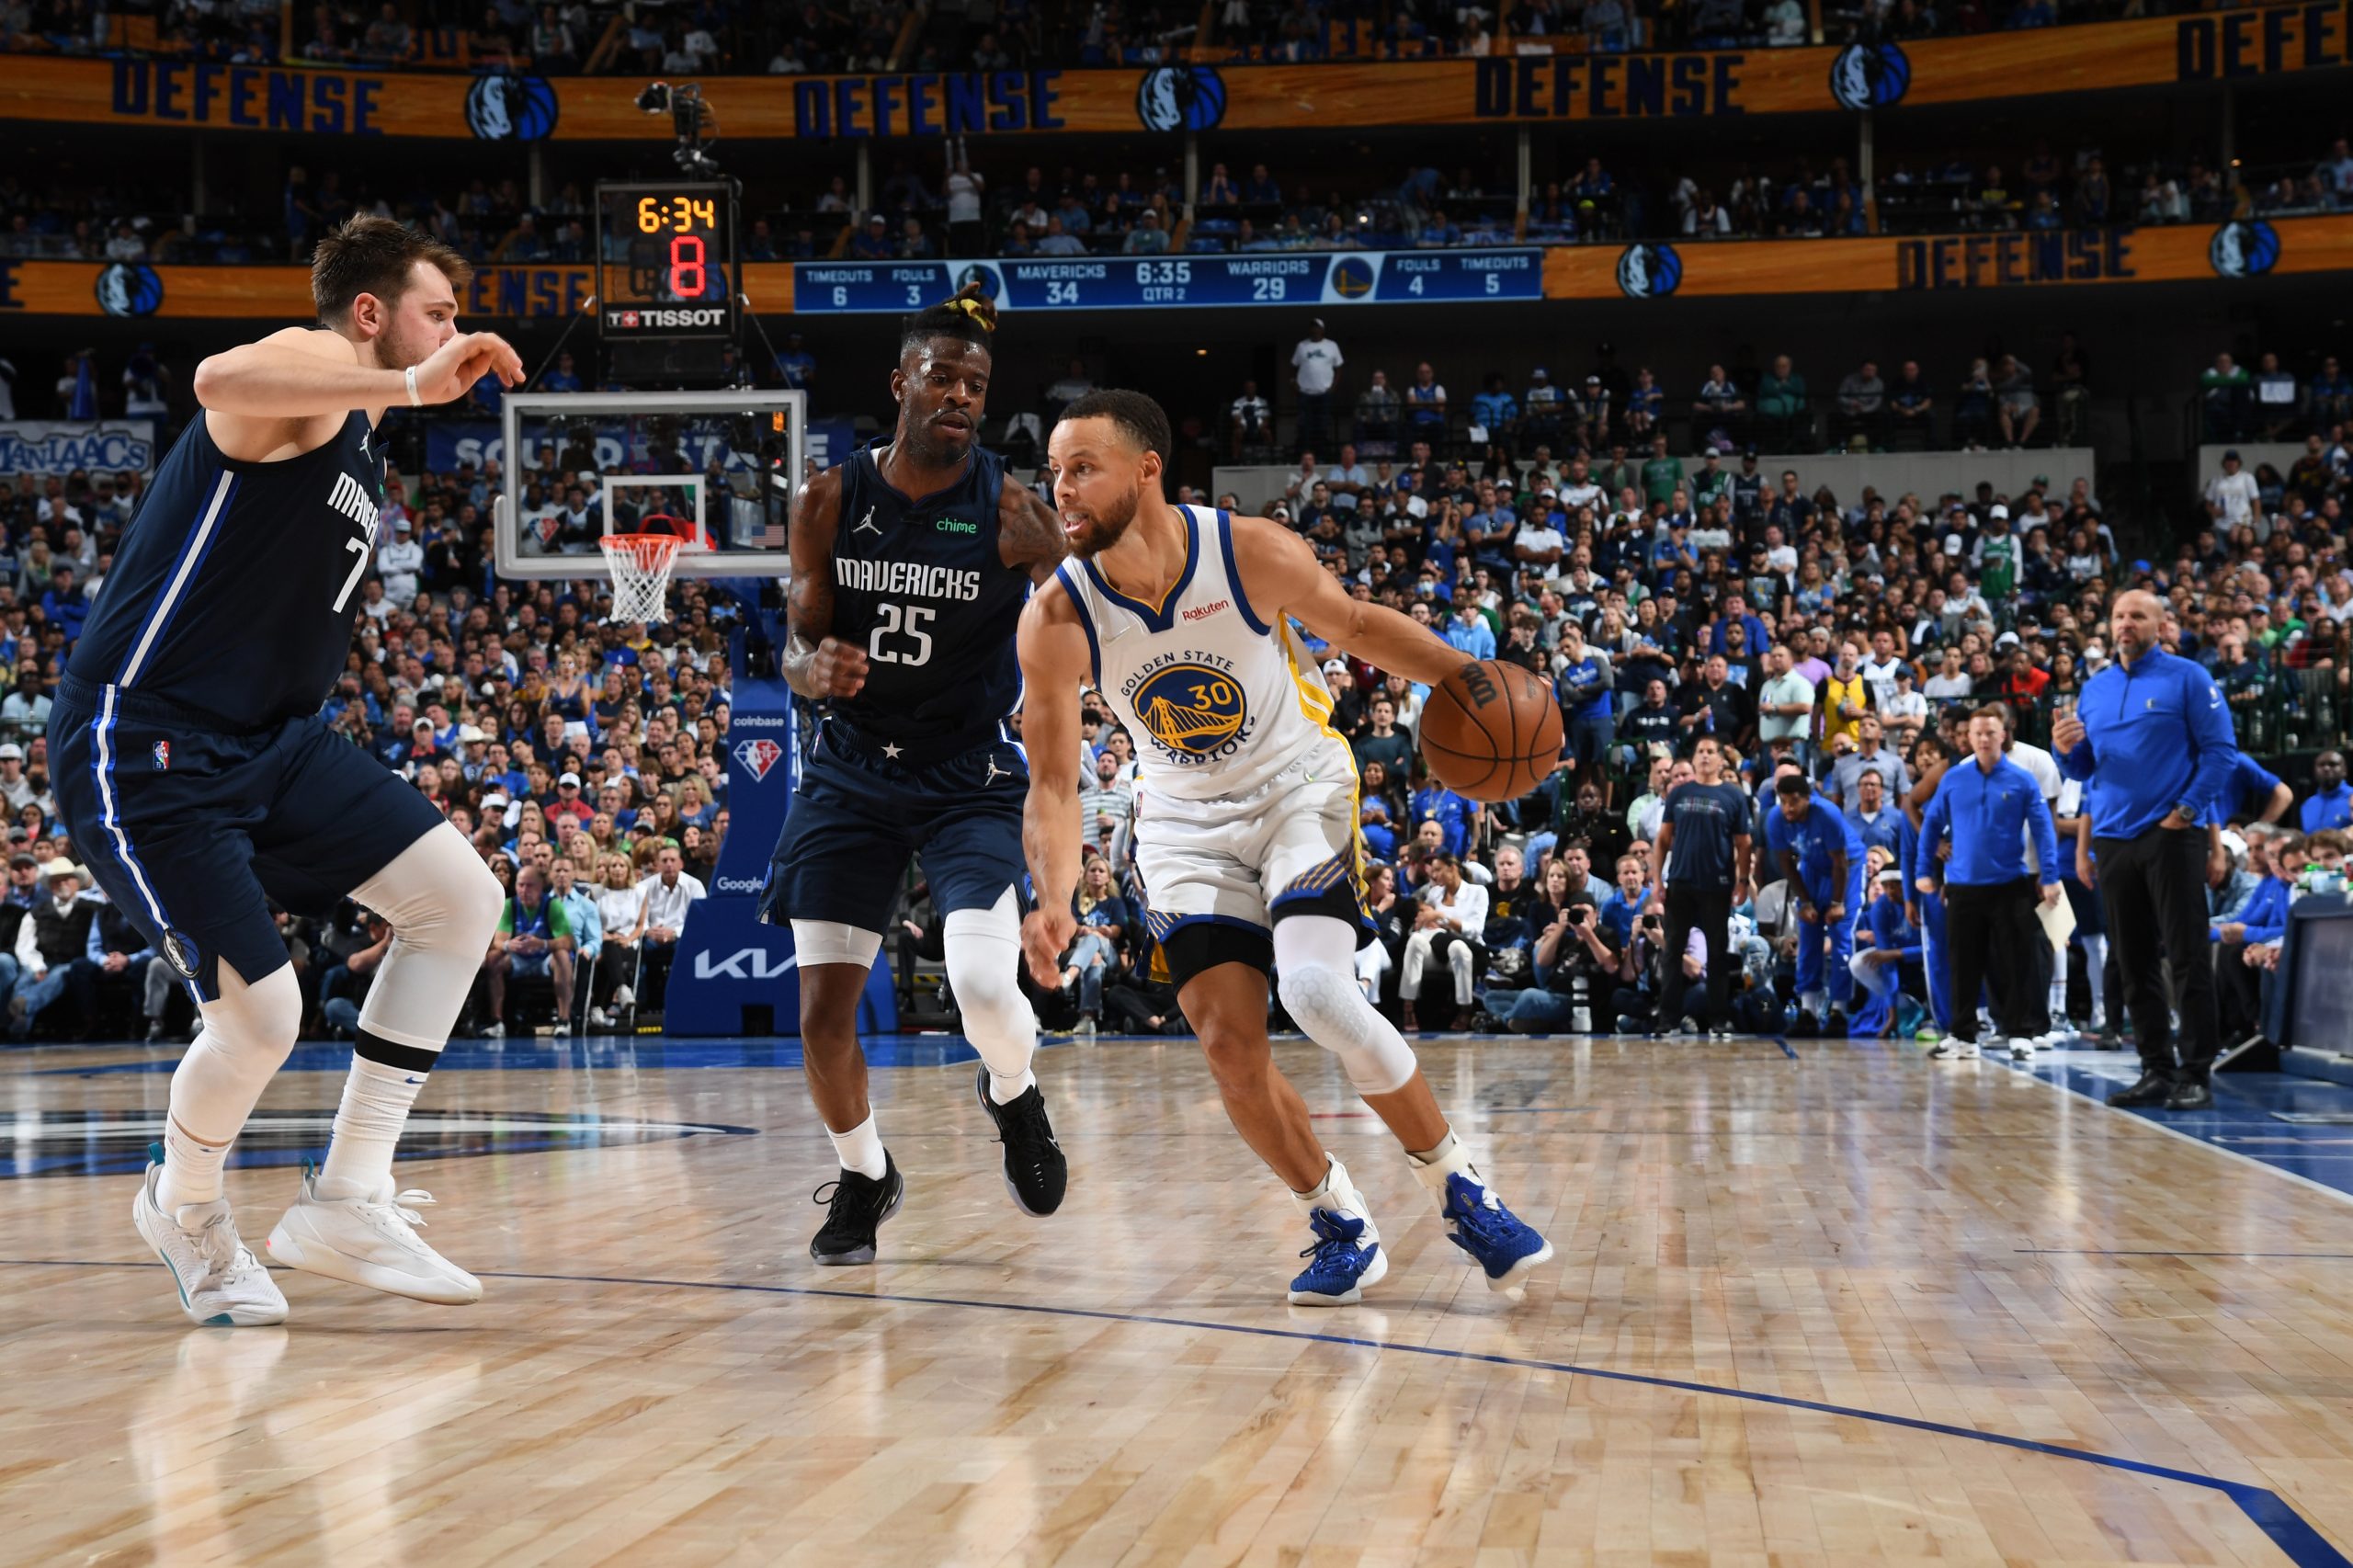 Stephen Curry Scores 31 to Lead Warriors to 109-100 Win and 3-0 Series Over Mavs